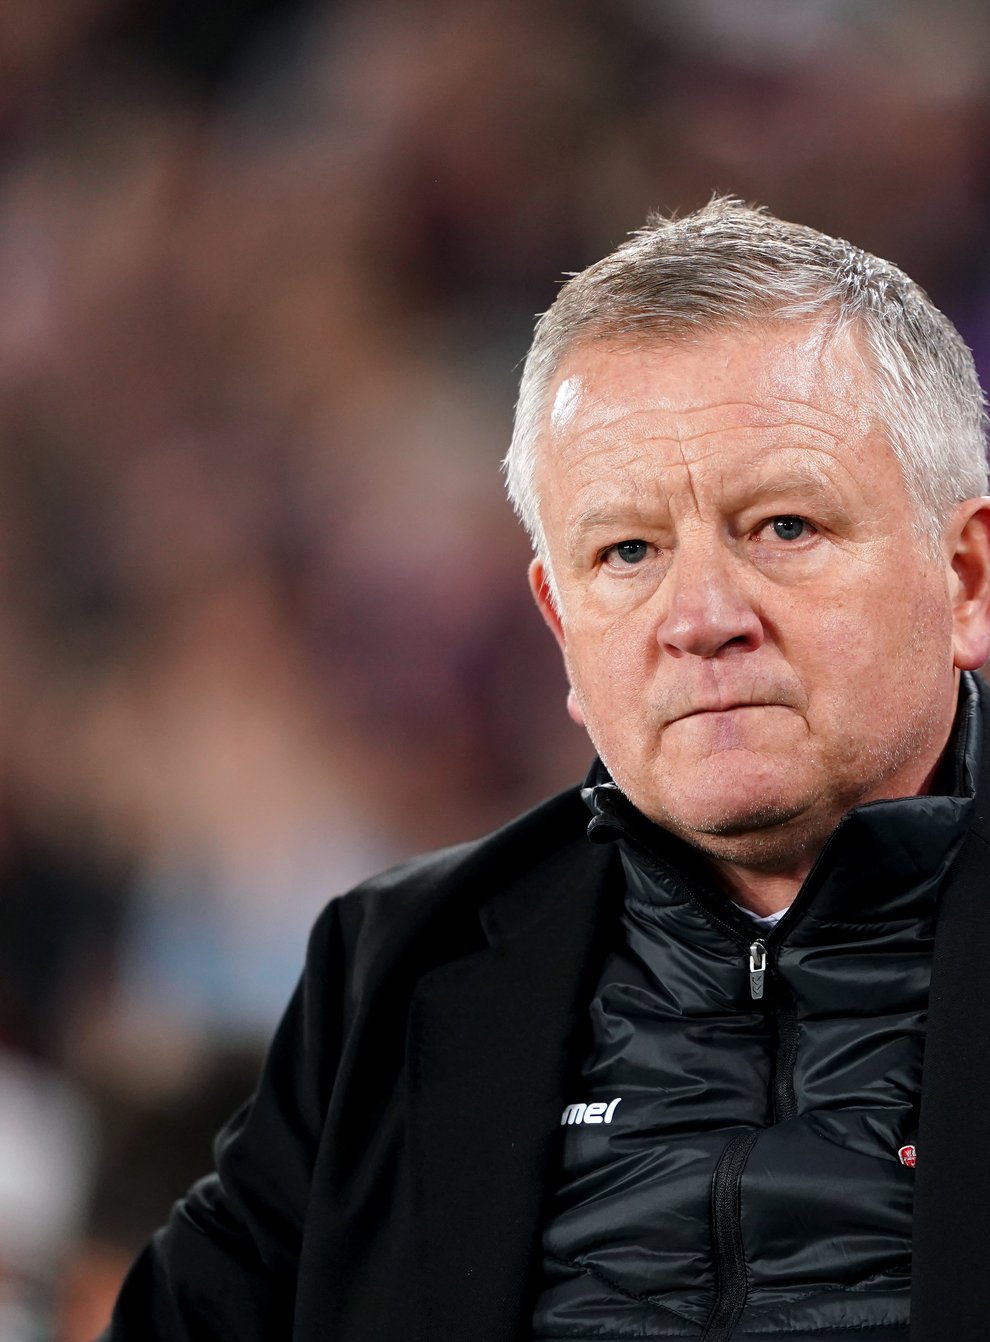 Middlesbrough manager Chris Wilder endured a miserable return to Sheffield United (Zac Goodwin/PA)